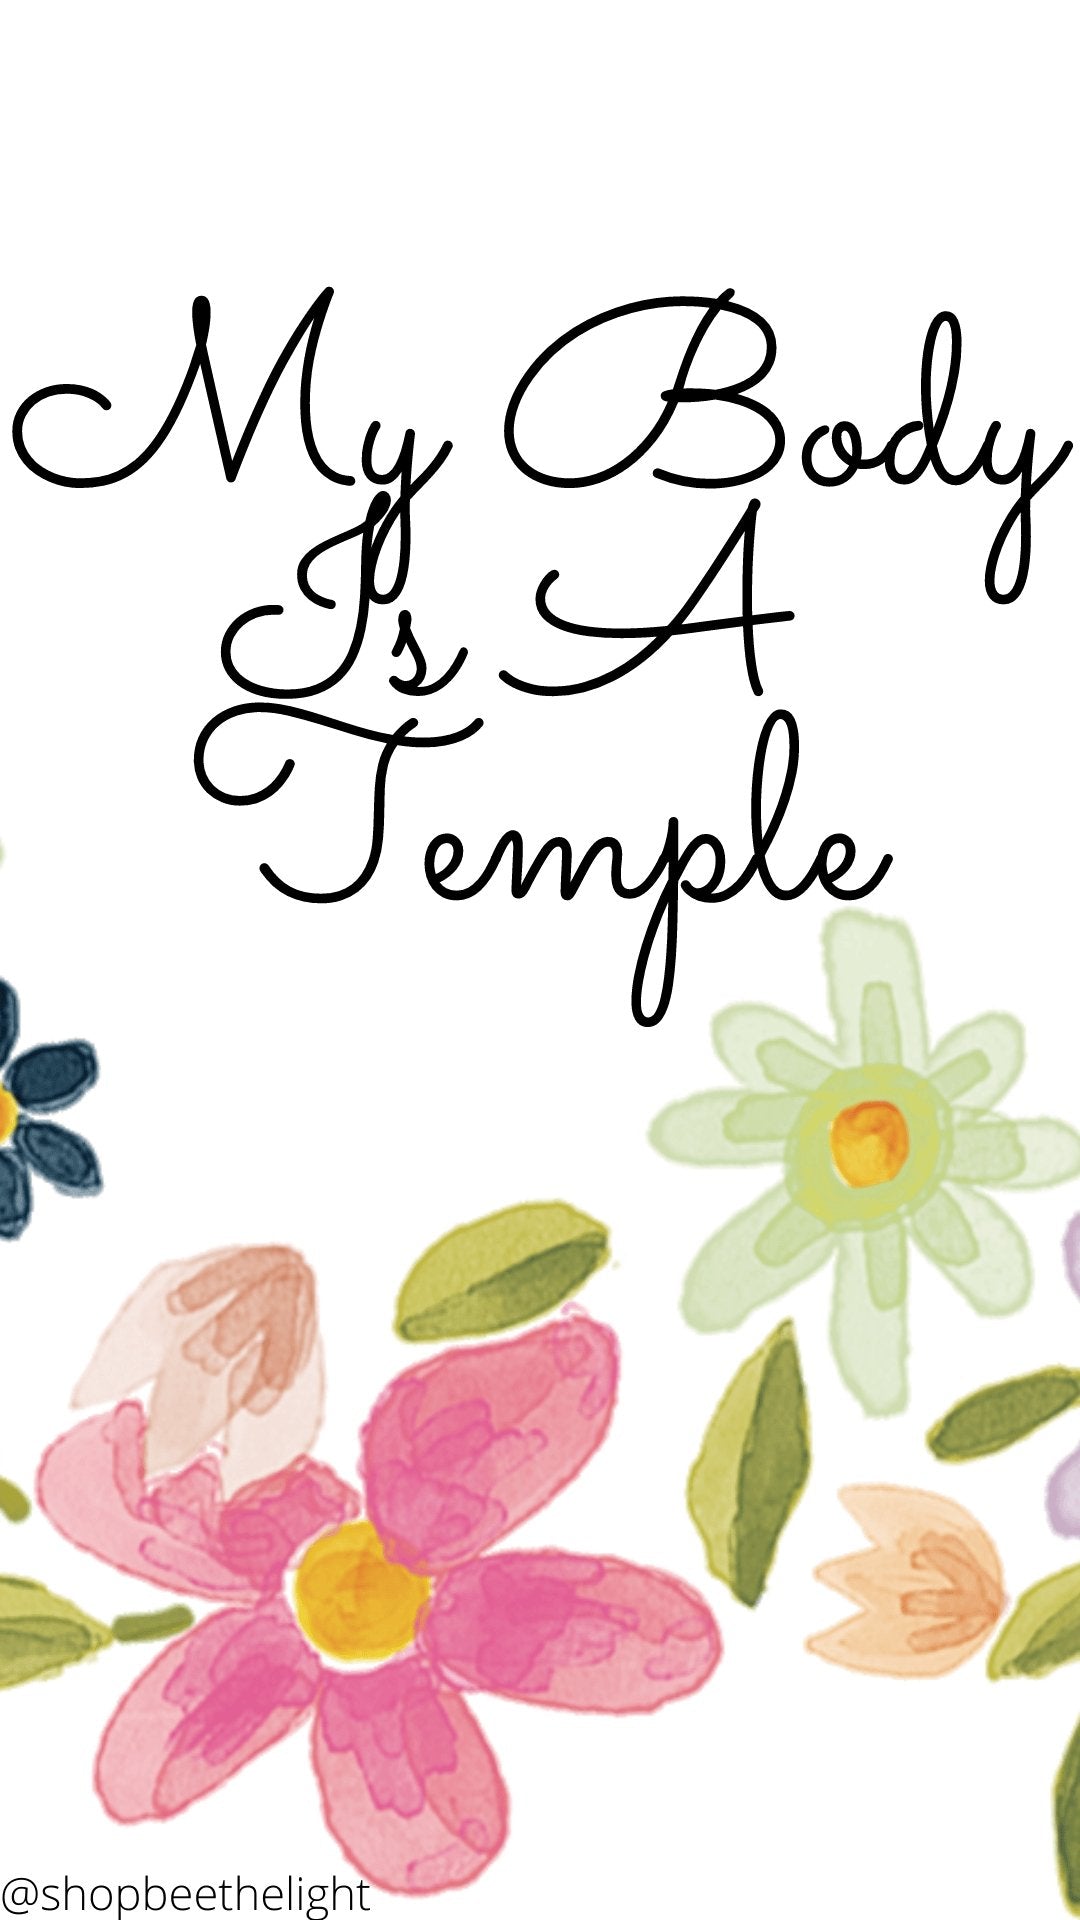 My Body is a Temple Phone Wallpaper - Bee The Light